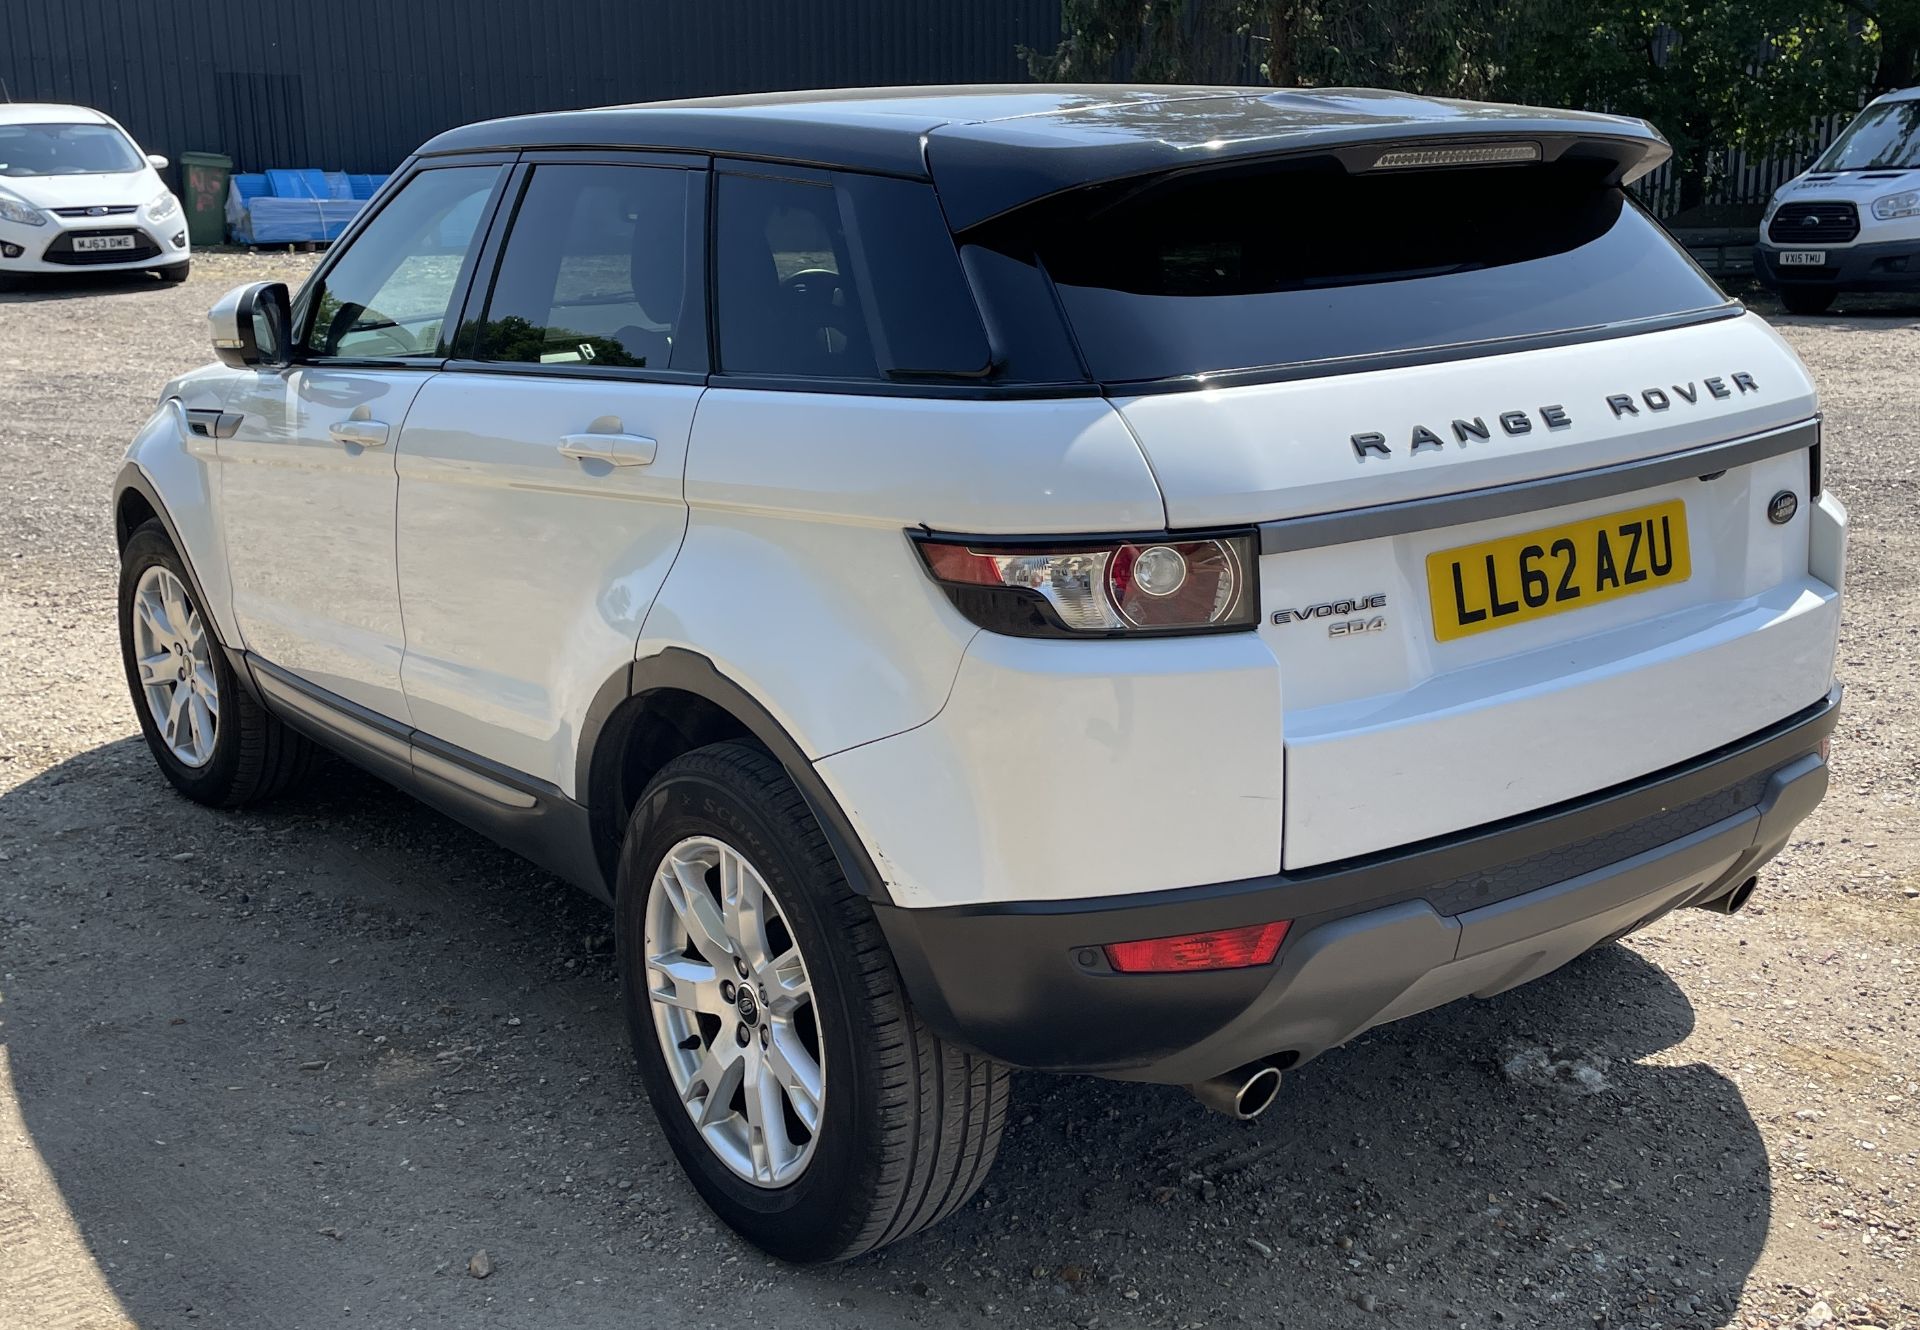 Land Rover Range Rover Evoque, Hatchback, 2.2 Sd4 Pure 5dr Auto [Tech Pack], Registration LL62 - Image 5 of 26